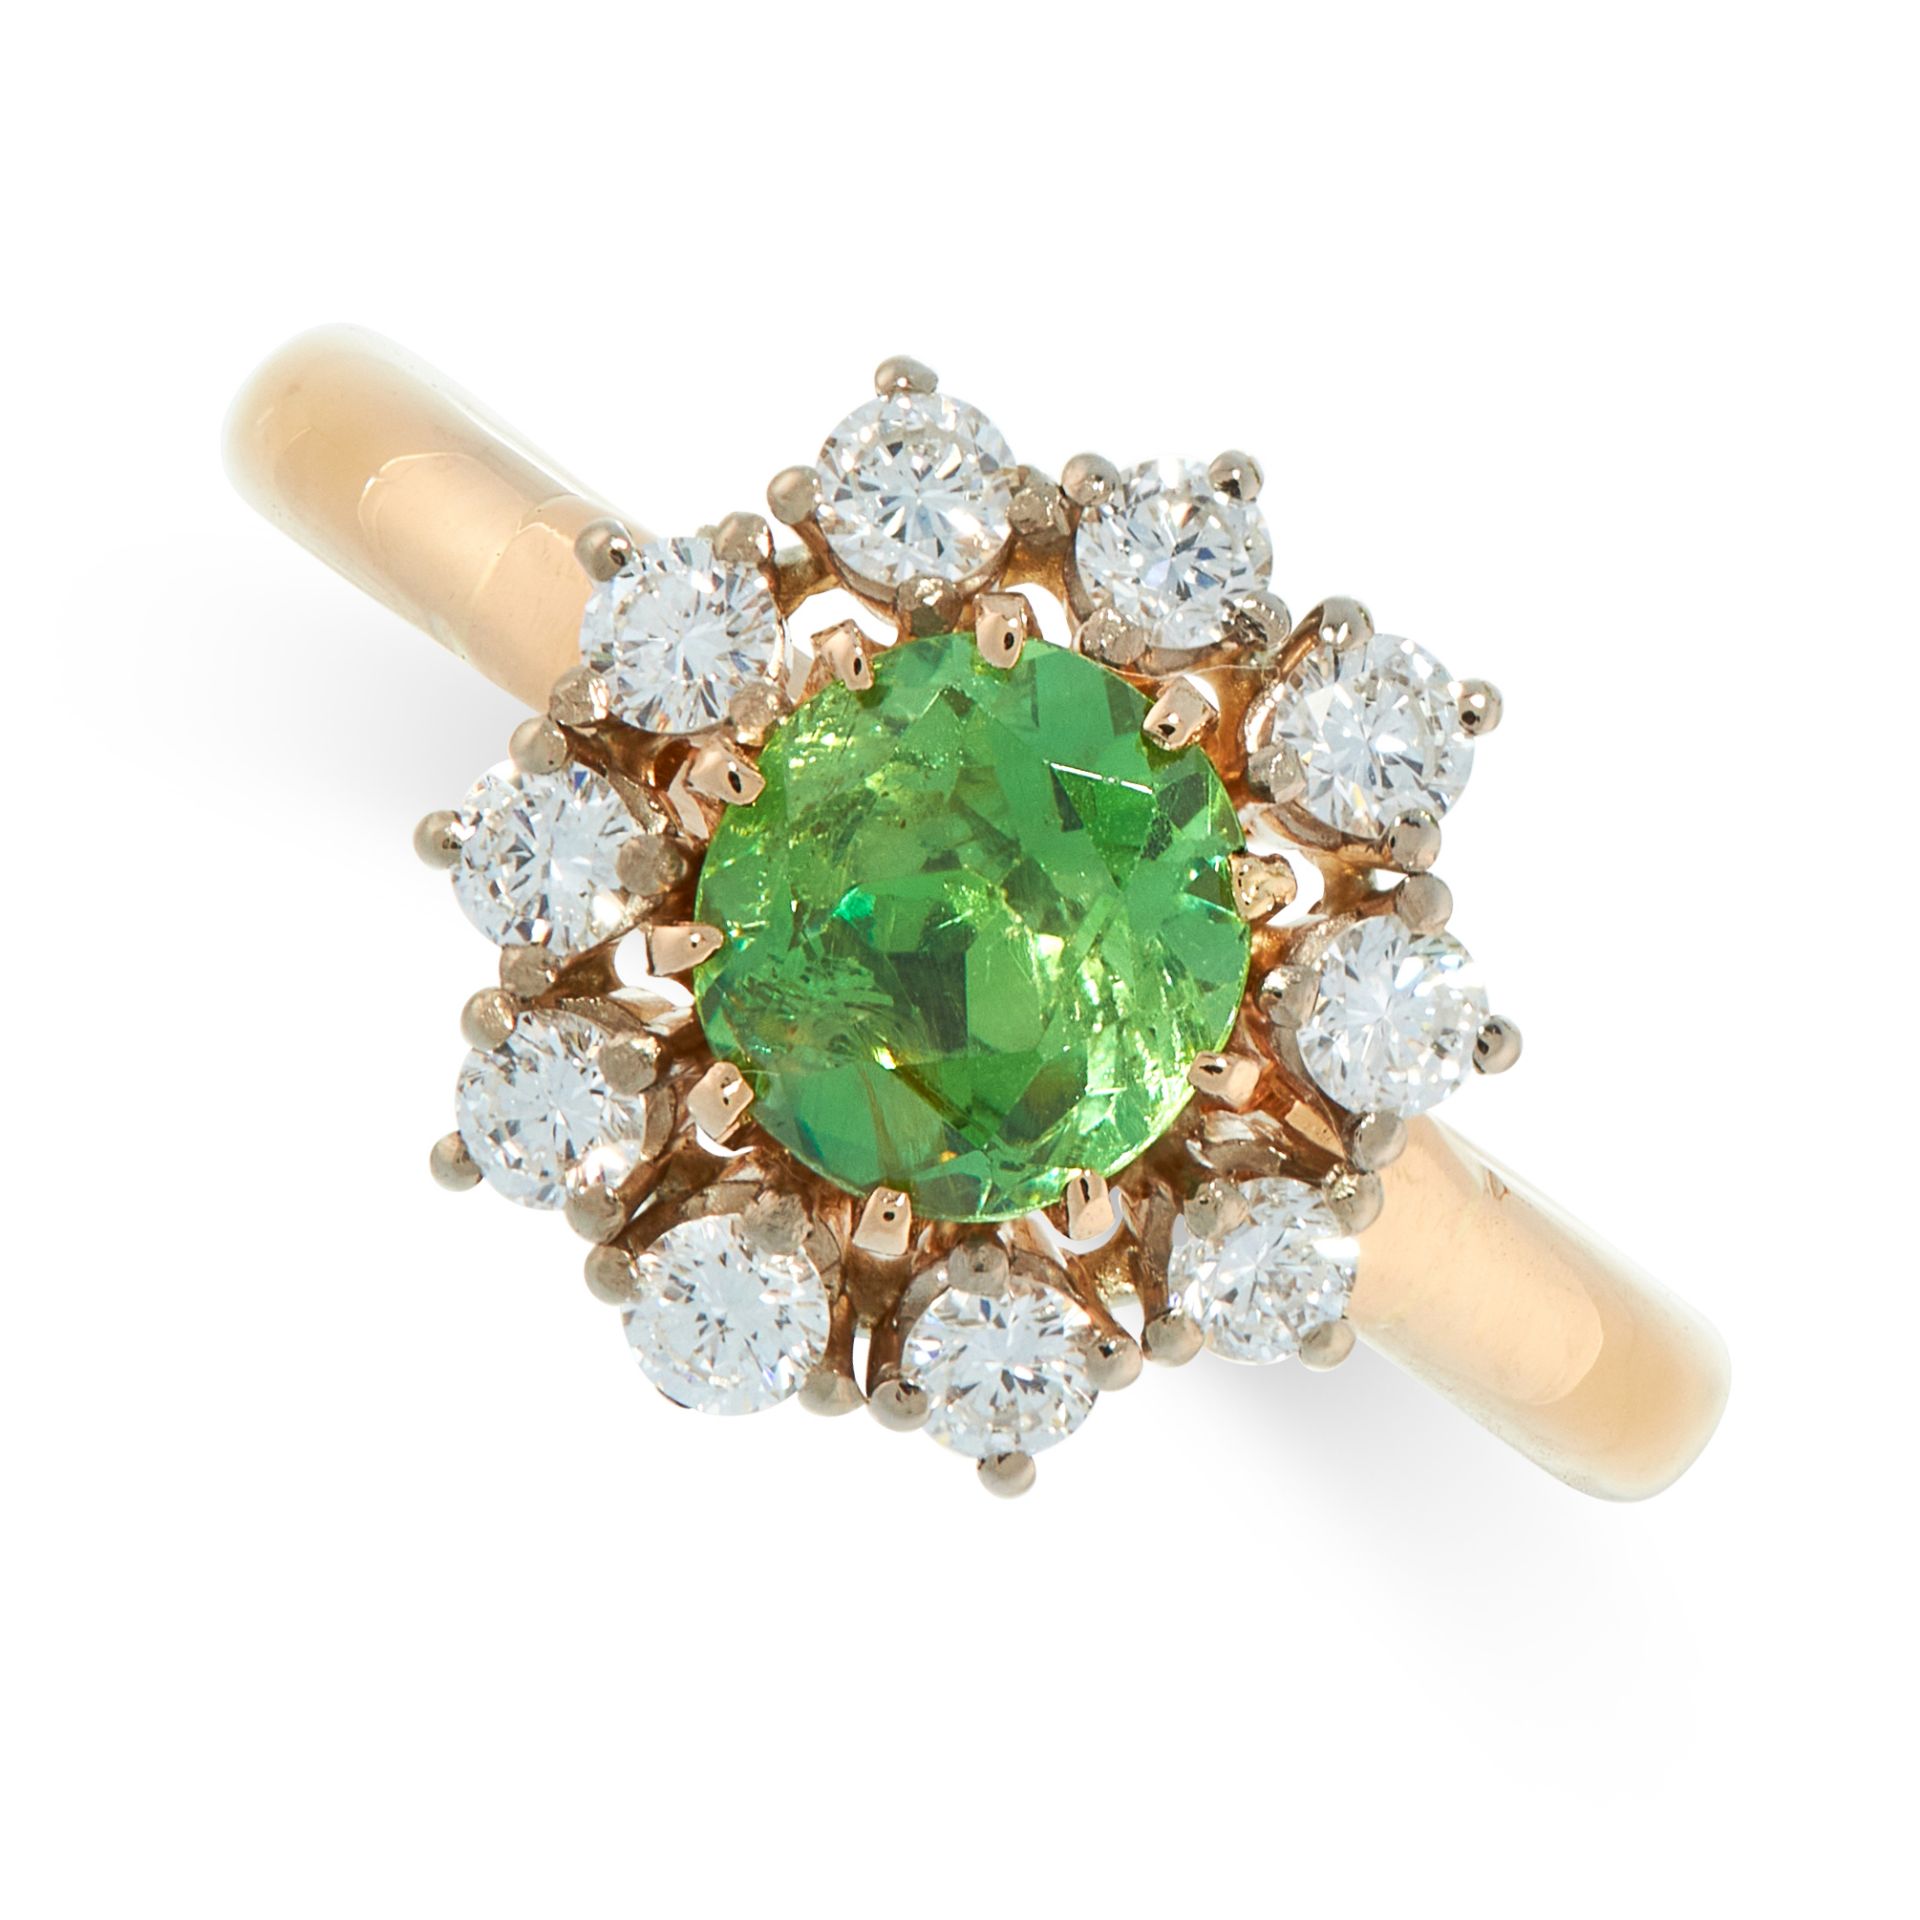 DEMANTOID AND DIAMOND RING set with a cushion cut demantoid garnet of 1.06 carats within a border of